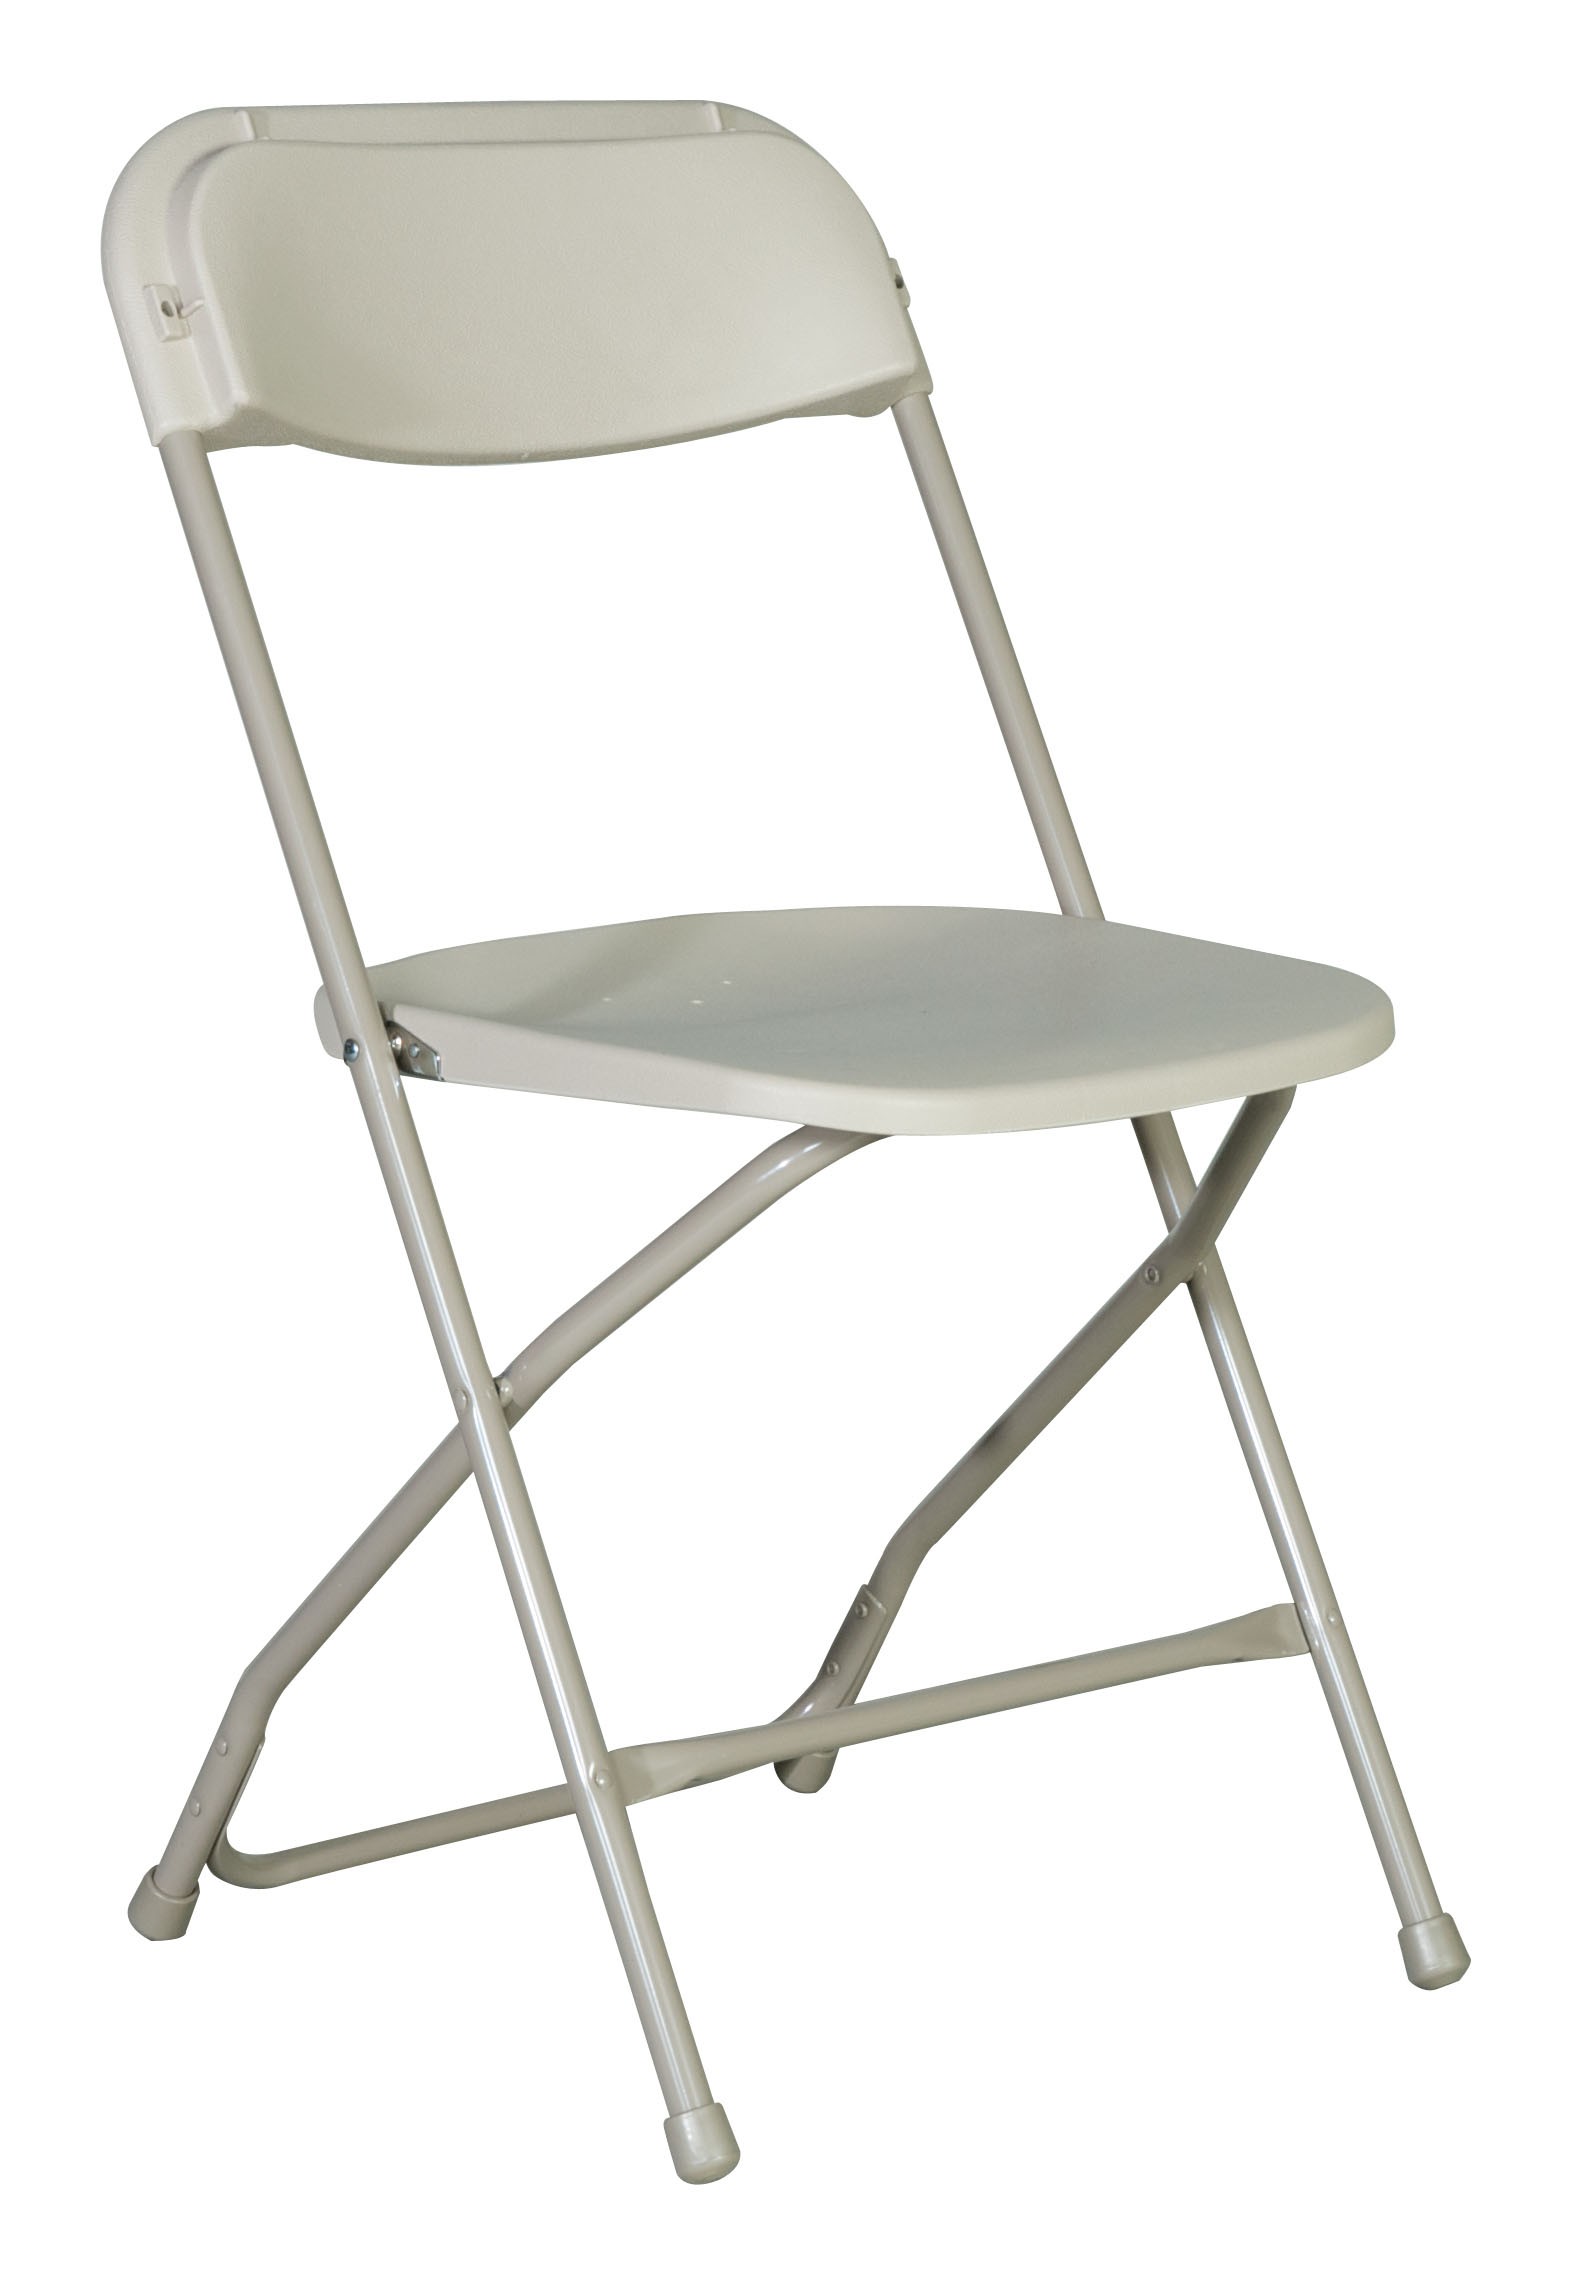 Folding chairs cream-colored folding chair QNZSOMX